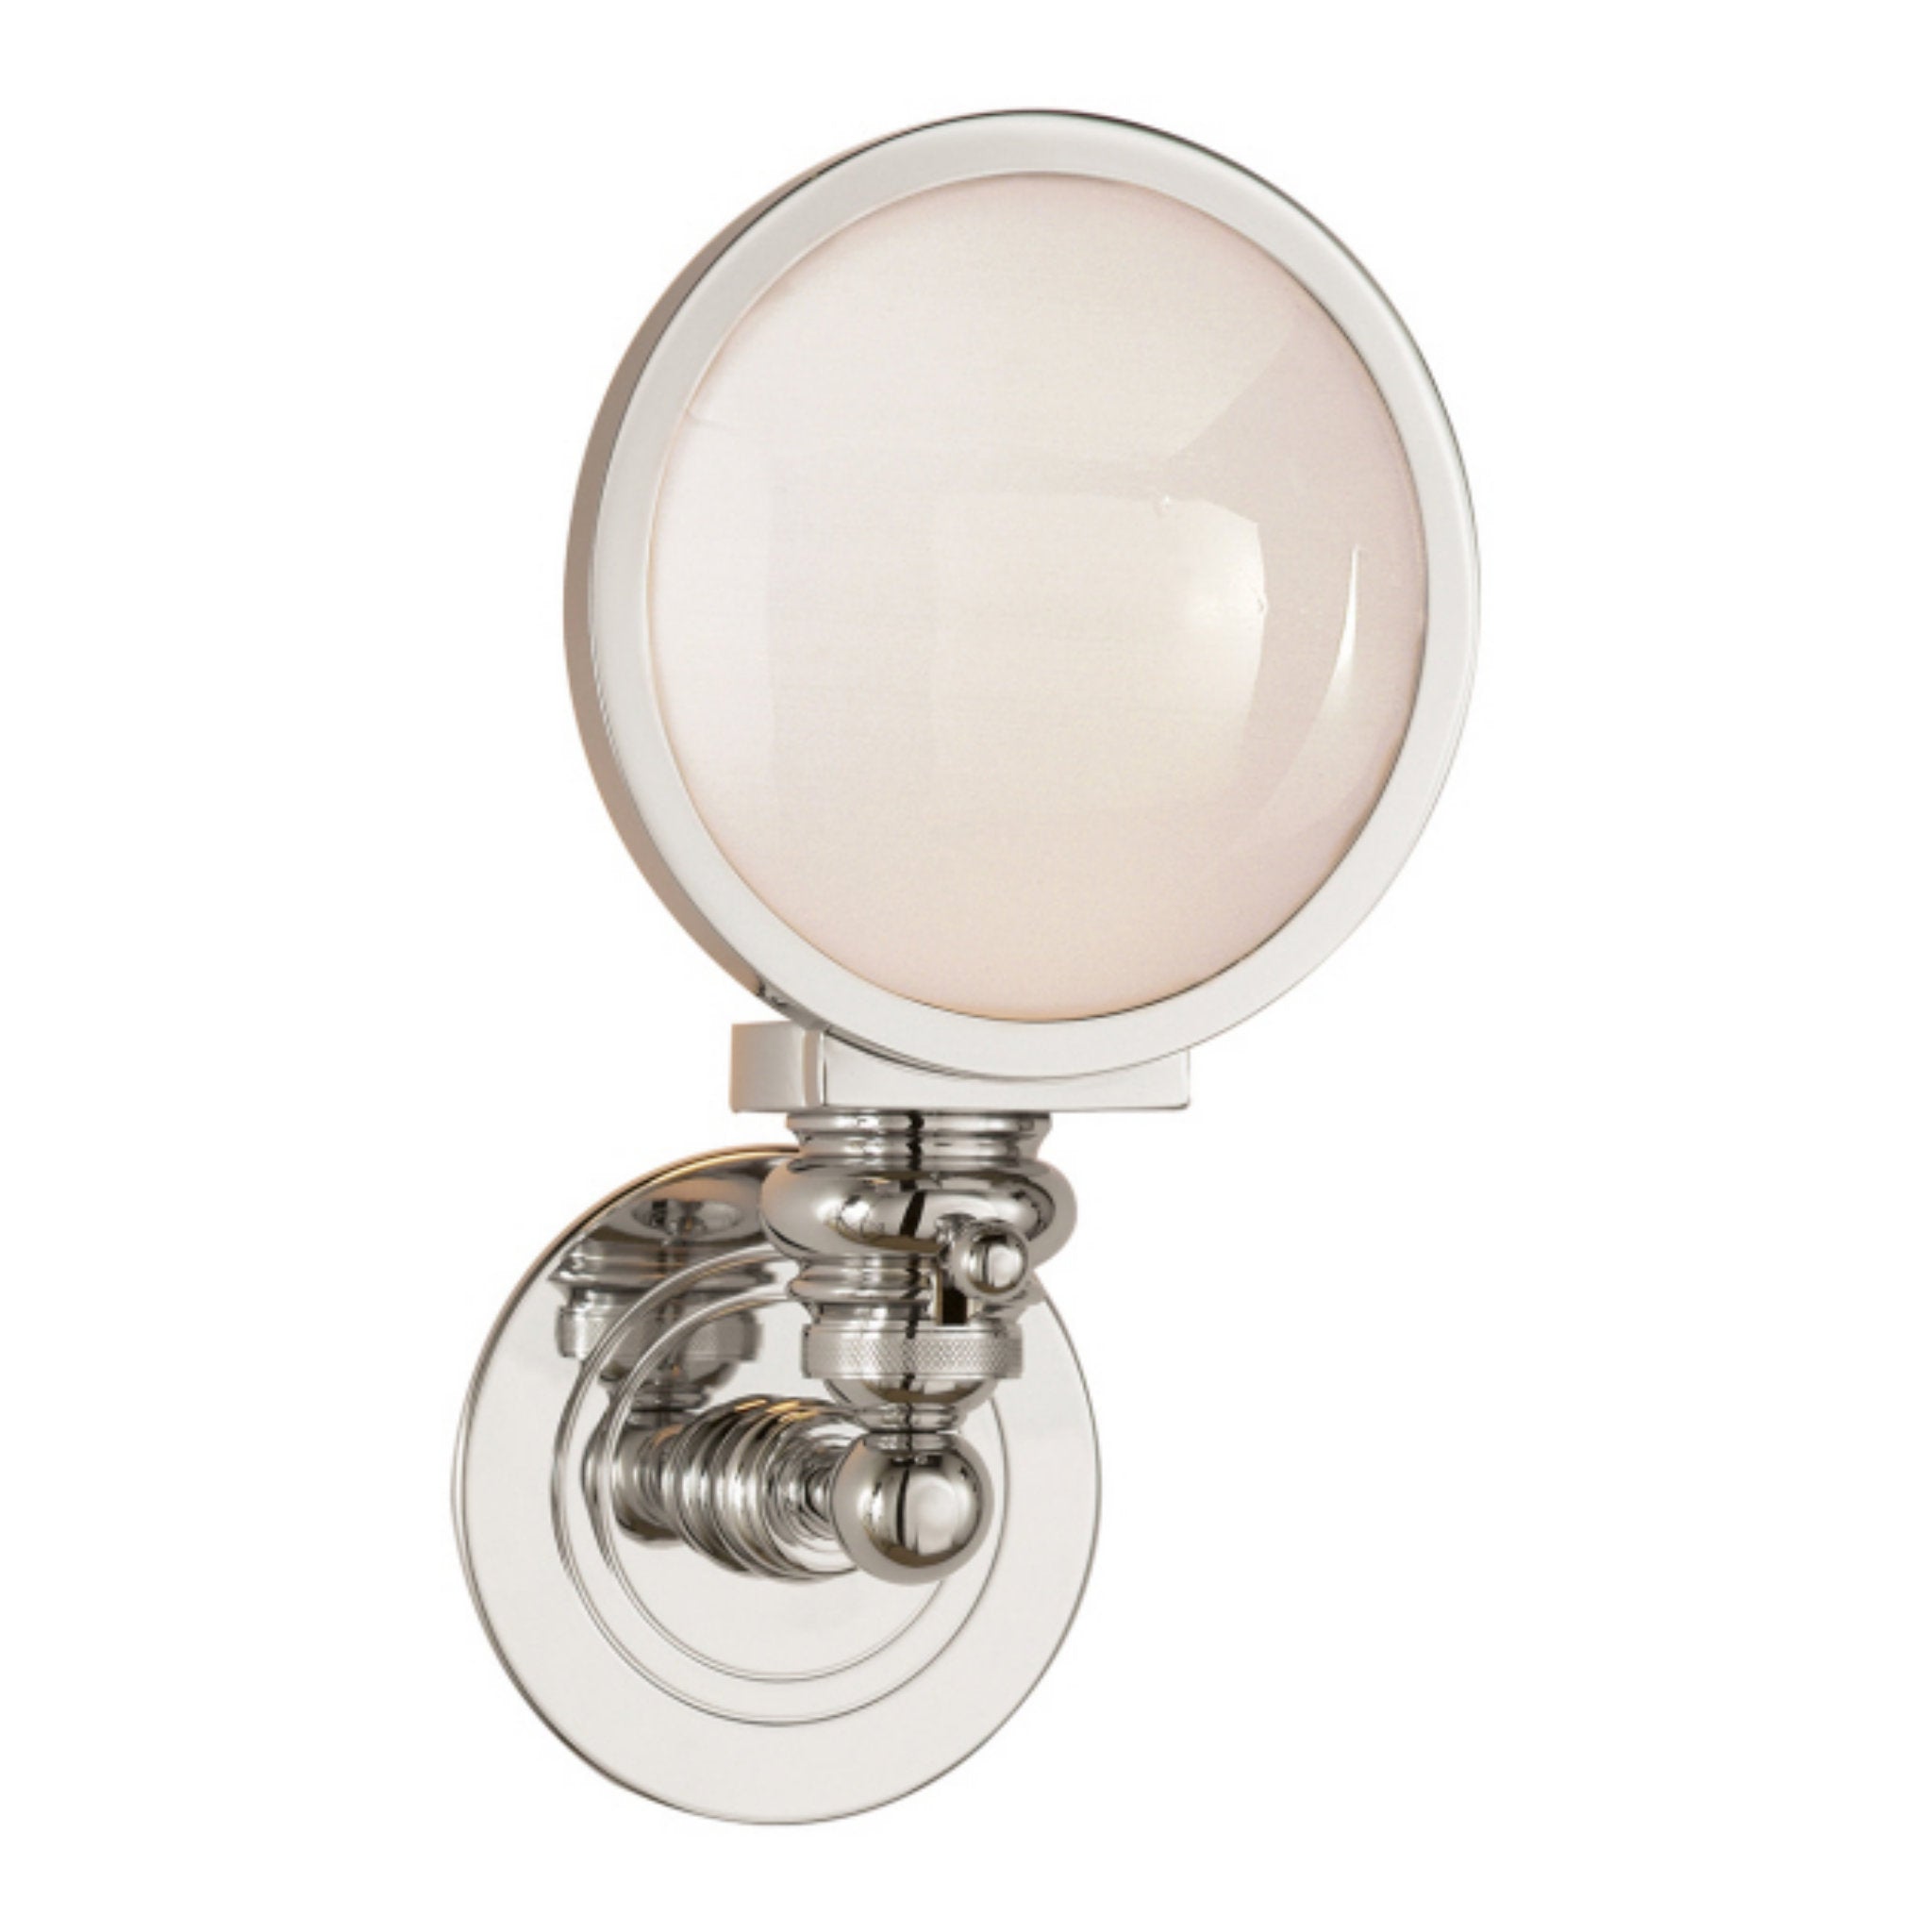 Chapman & Myers Boston Head Light Sconce in Polished Nickel with White Glass